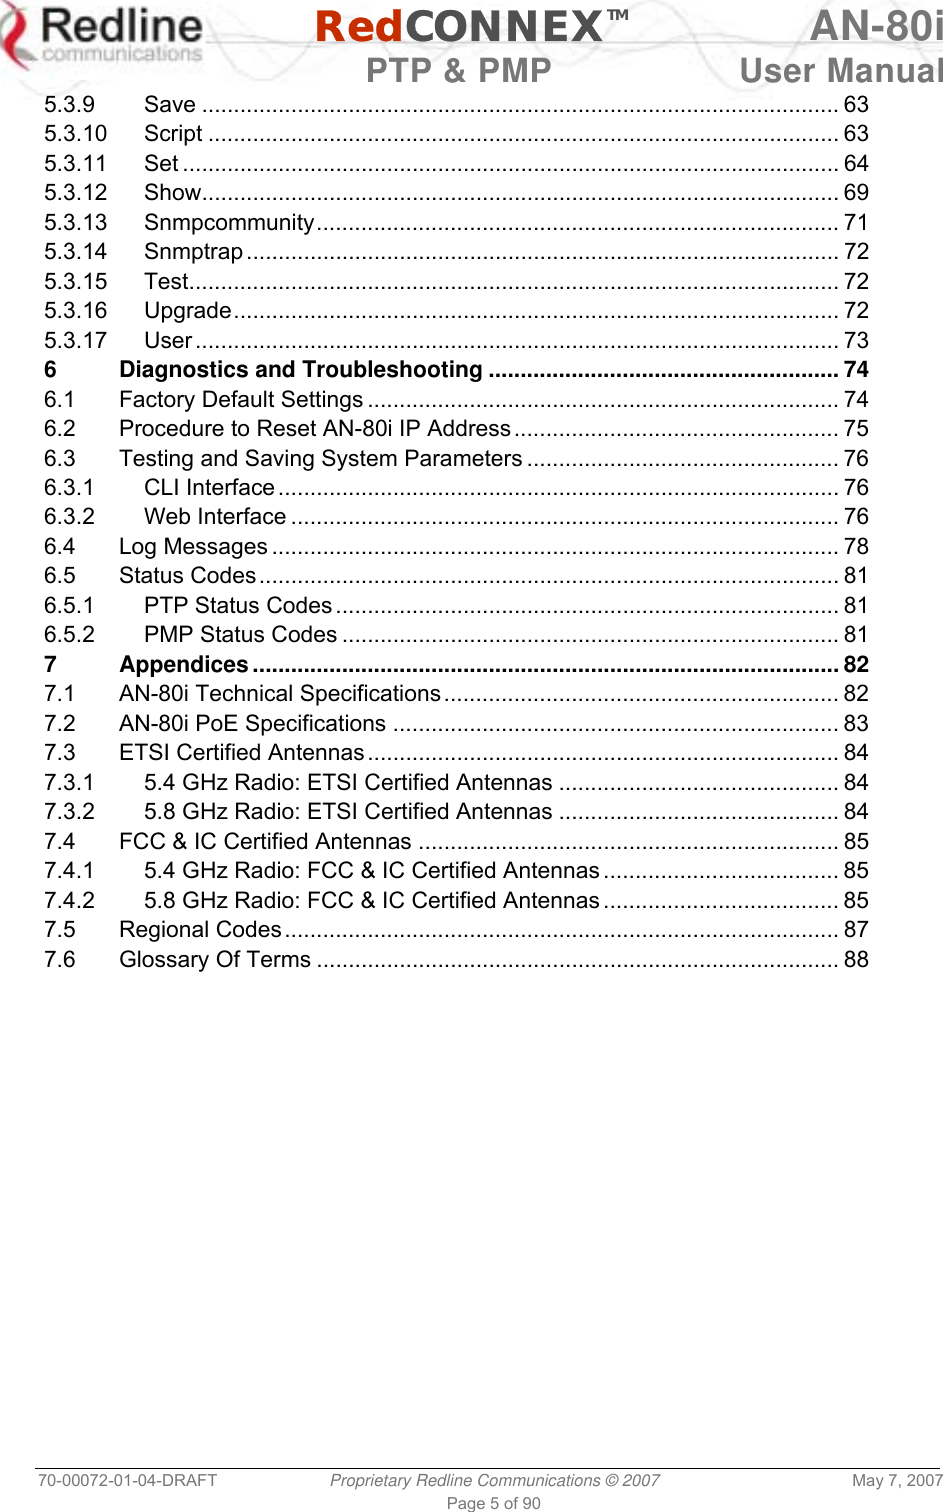   RedCONNEXTM AN-80i   PTP &amp; PMP  User Manual 70-00072-01-04-DRAFT  Proprietary Redline Communications © 2007  May 7, 2007 Page 5 of 90 5.3.9 Save .................................................................................................... 63 5.3.10 Script ................................................................................................... 63 5.3.11 Set ....................................................................................................... 64 5.3.12 Show.................................................................................................... 69 5.3.13 Snmpcommunity.................................................................................. 71 5.3.14 Snmptrap ............................................................................................. 72 5.3.15 Test...................................................................................................... 72 5.3.16 Upgrade............................................................................................... 72 5.3.17 User ..................................................................................................... 73 6 Diagnostics and Troubleshooting ....................................................... 74 6.1 Factory Default Settings .......................................................................... 74 6.2 Procedure to Reset AN-80i IP Address................................................... 75 6.3 Testing and Saving System Parameters ................................................. 76 6.3.1 CLI Interface ........................................................................................ 76 6.3.2 Web Interface ...................................................................................... 76 6.4 Log Messages ......................................................................................... 78 6.5 Status Codes........................................................................................... 81 6.5.1 PTP Status Codes ............................................................................... 81 6.5.2 PMP Status Codes .............................................................................. 81 7 Appendices............................................................................................ 82 7.1 AN-80i Technical Specifications.............................................................. 82 7.2 AN-80i PoE Specifications ...................................................................... 83 7.3 ETSI Certified Antennas.......................................................................... 84 7.3.1 5.4 GHz Radio: ETSI Certified Antennas ............................................ 84 7.3.2 5.8 GHz Radio: ETSI Certified Antennas ............................................ 84 7.4 FCC &amp; IC Certified Antennas .................................................................. 85 7.4.1 5.4 GHz Radio: FCC &amp; IC Certified Antennas ..................................... 85 7.4.2 5.8 GHz Radio: FCC &amp; IC Certified Antennas ..................................... 85 7.5 Regional Codes....................................................................................... 87 7.6 Glossary Of Terms .................................................................................. 88 